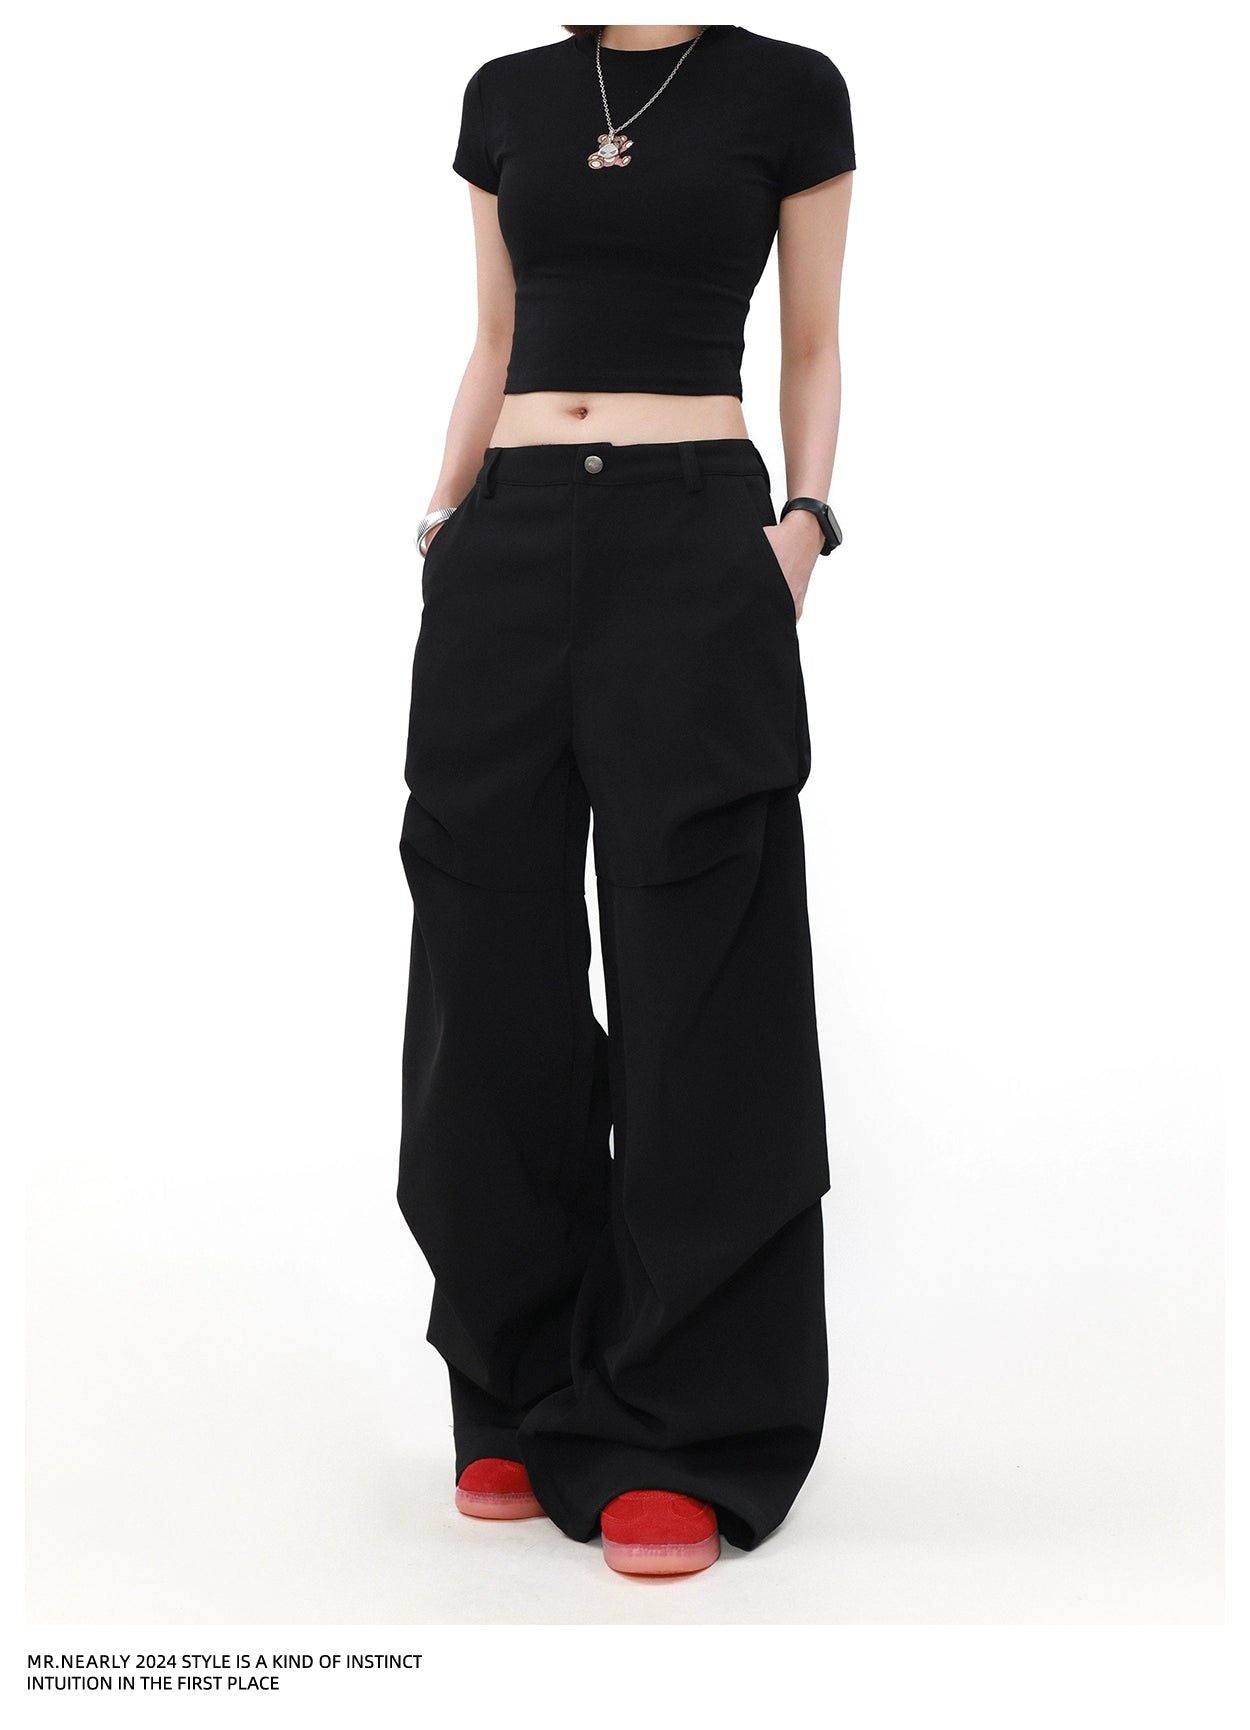 Plain Pleated Clean Fit Pants Korean Street Fashion Pants By Mr Nearly Shop Online at OH Vault